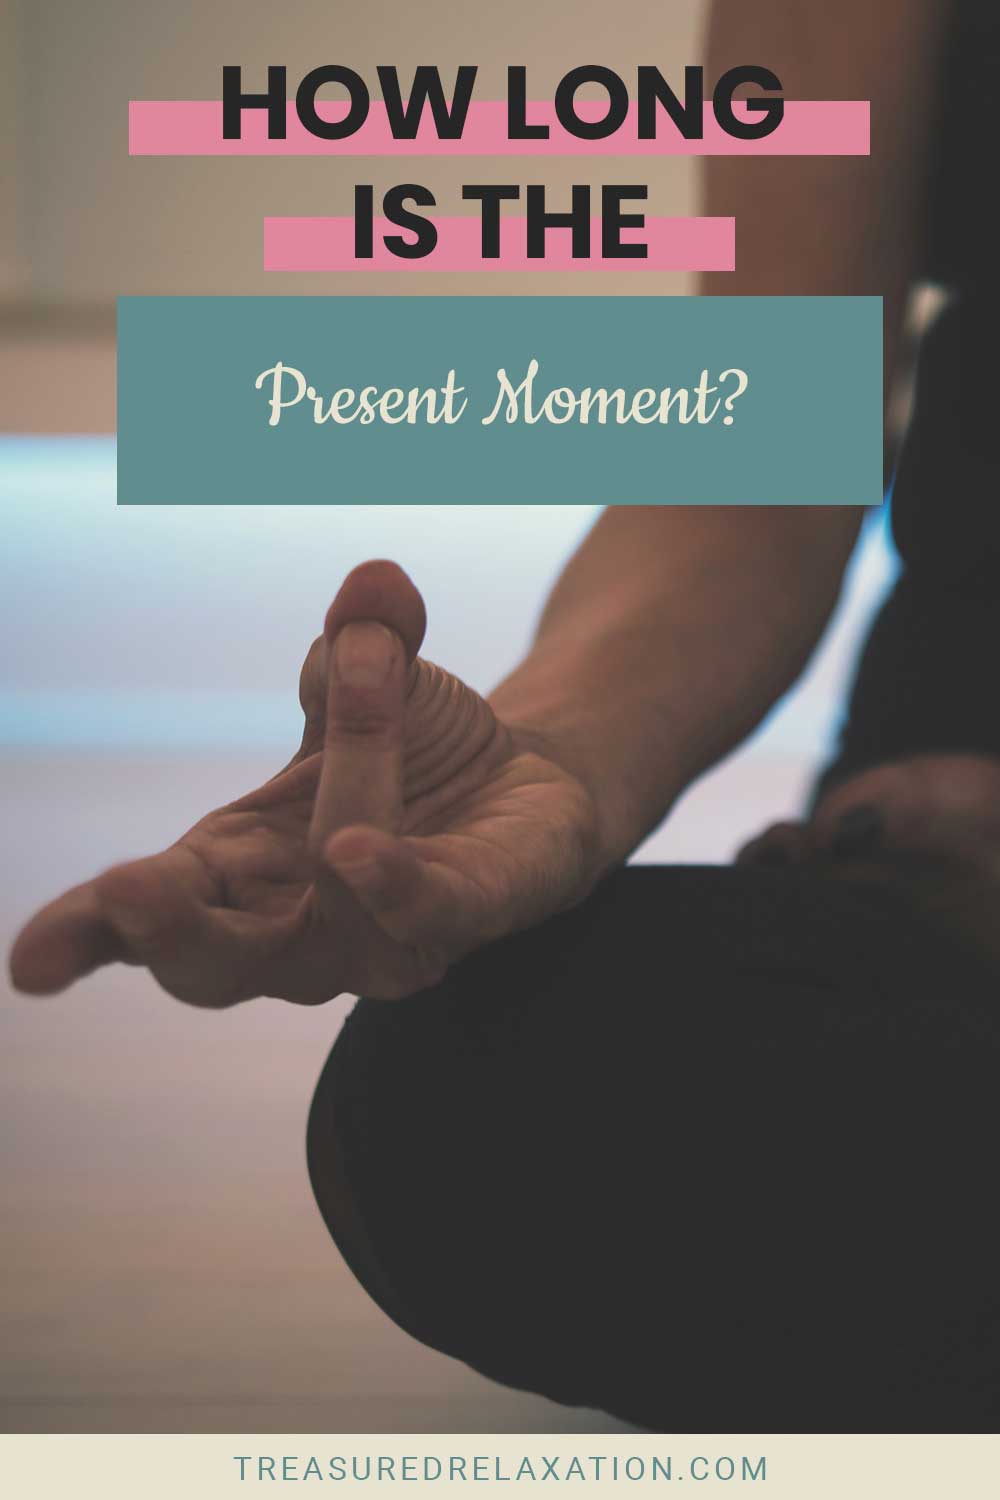 How Long is the Present Moment?